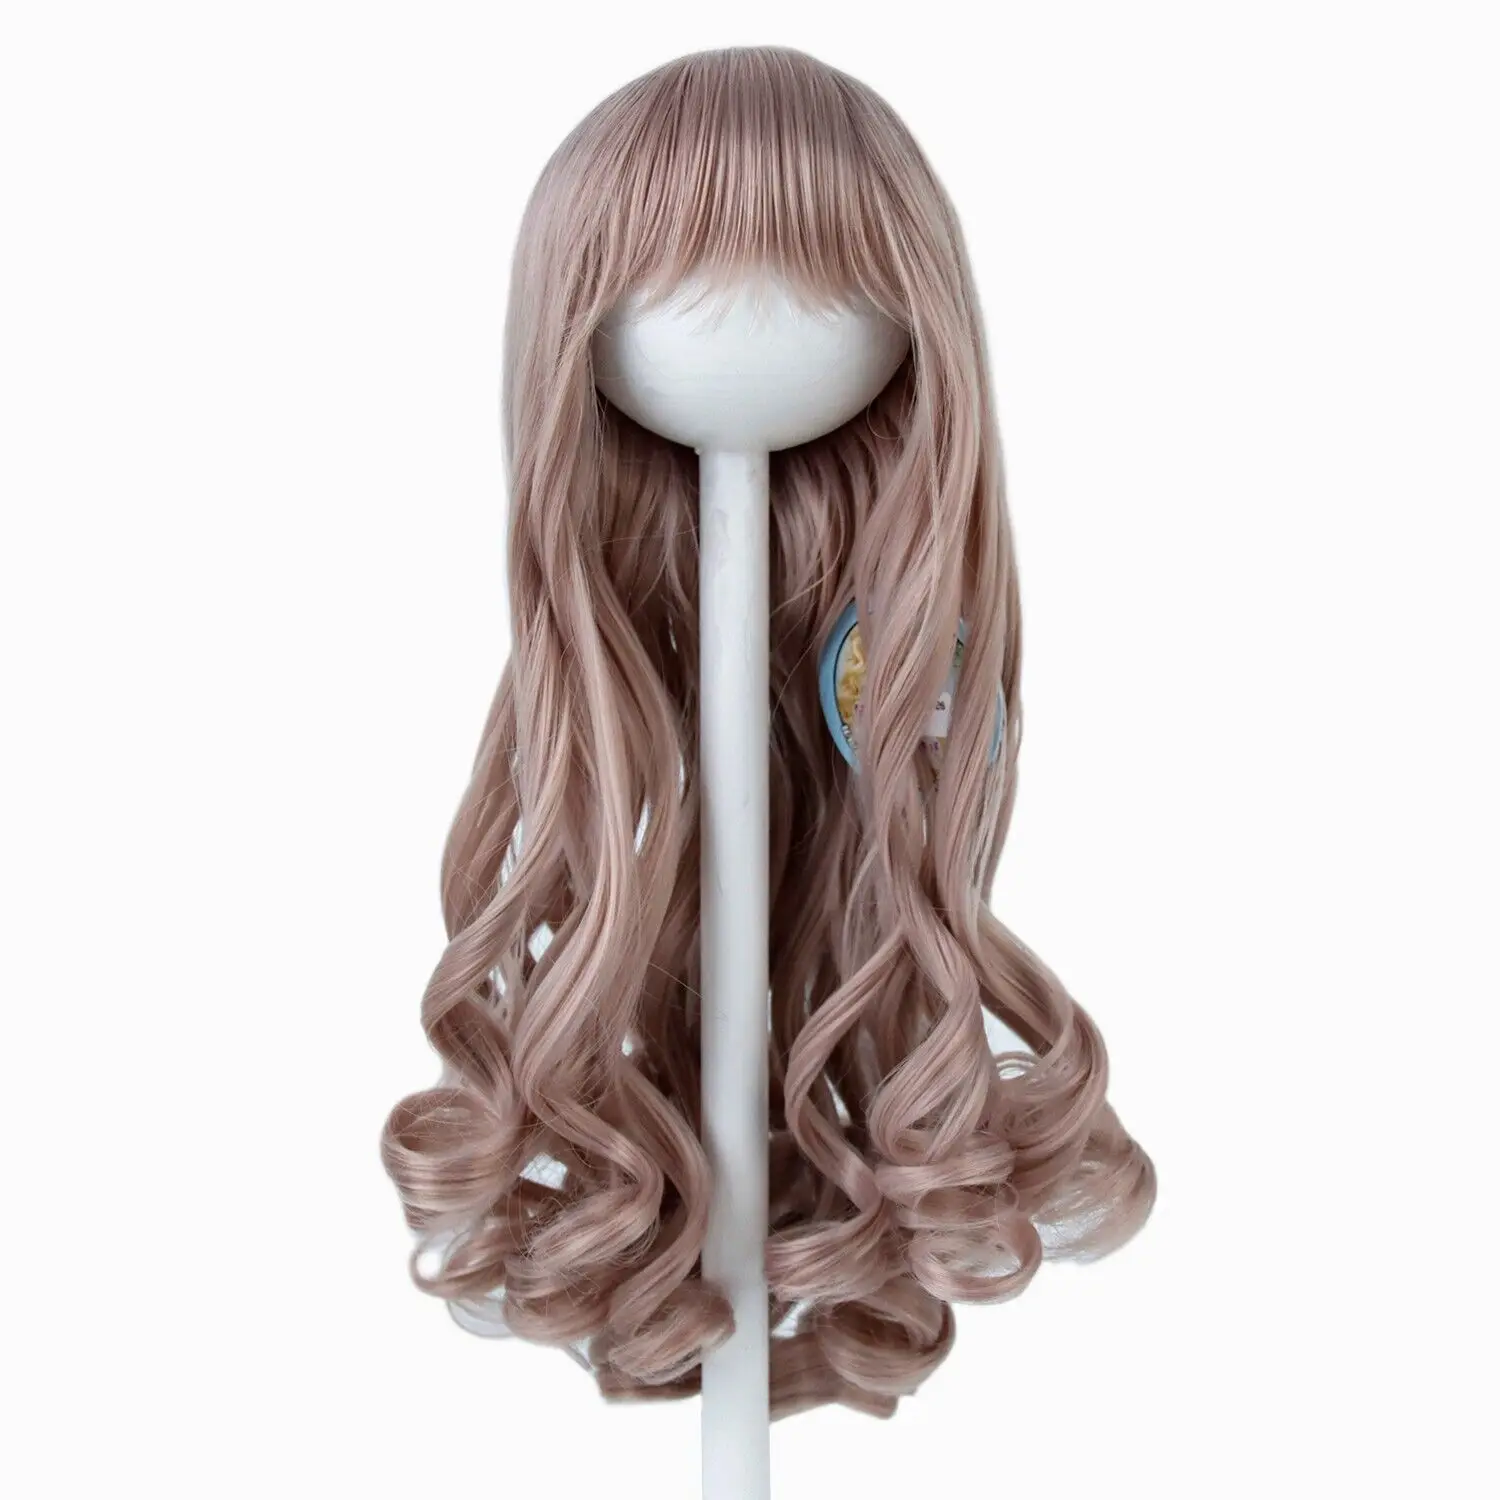 18'' American Doll Wigs Long Curly Coffe Colour With Bangs Hair For Girls Doll Wig 26-28cm head circumference long water wave none lace ginger orange high temperature wigs for women afro cosplay party daily synthetic hair wigs with bangs